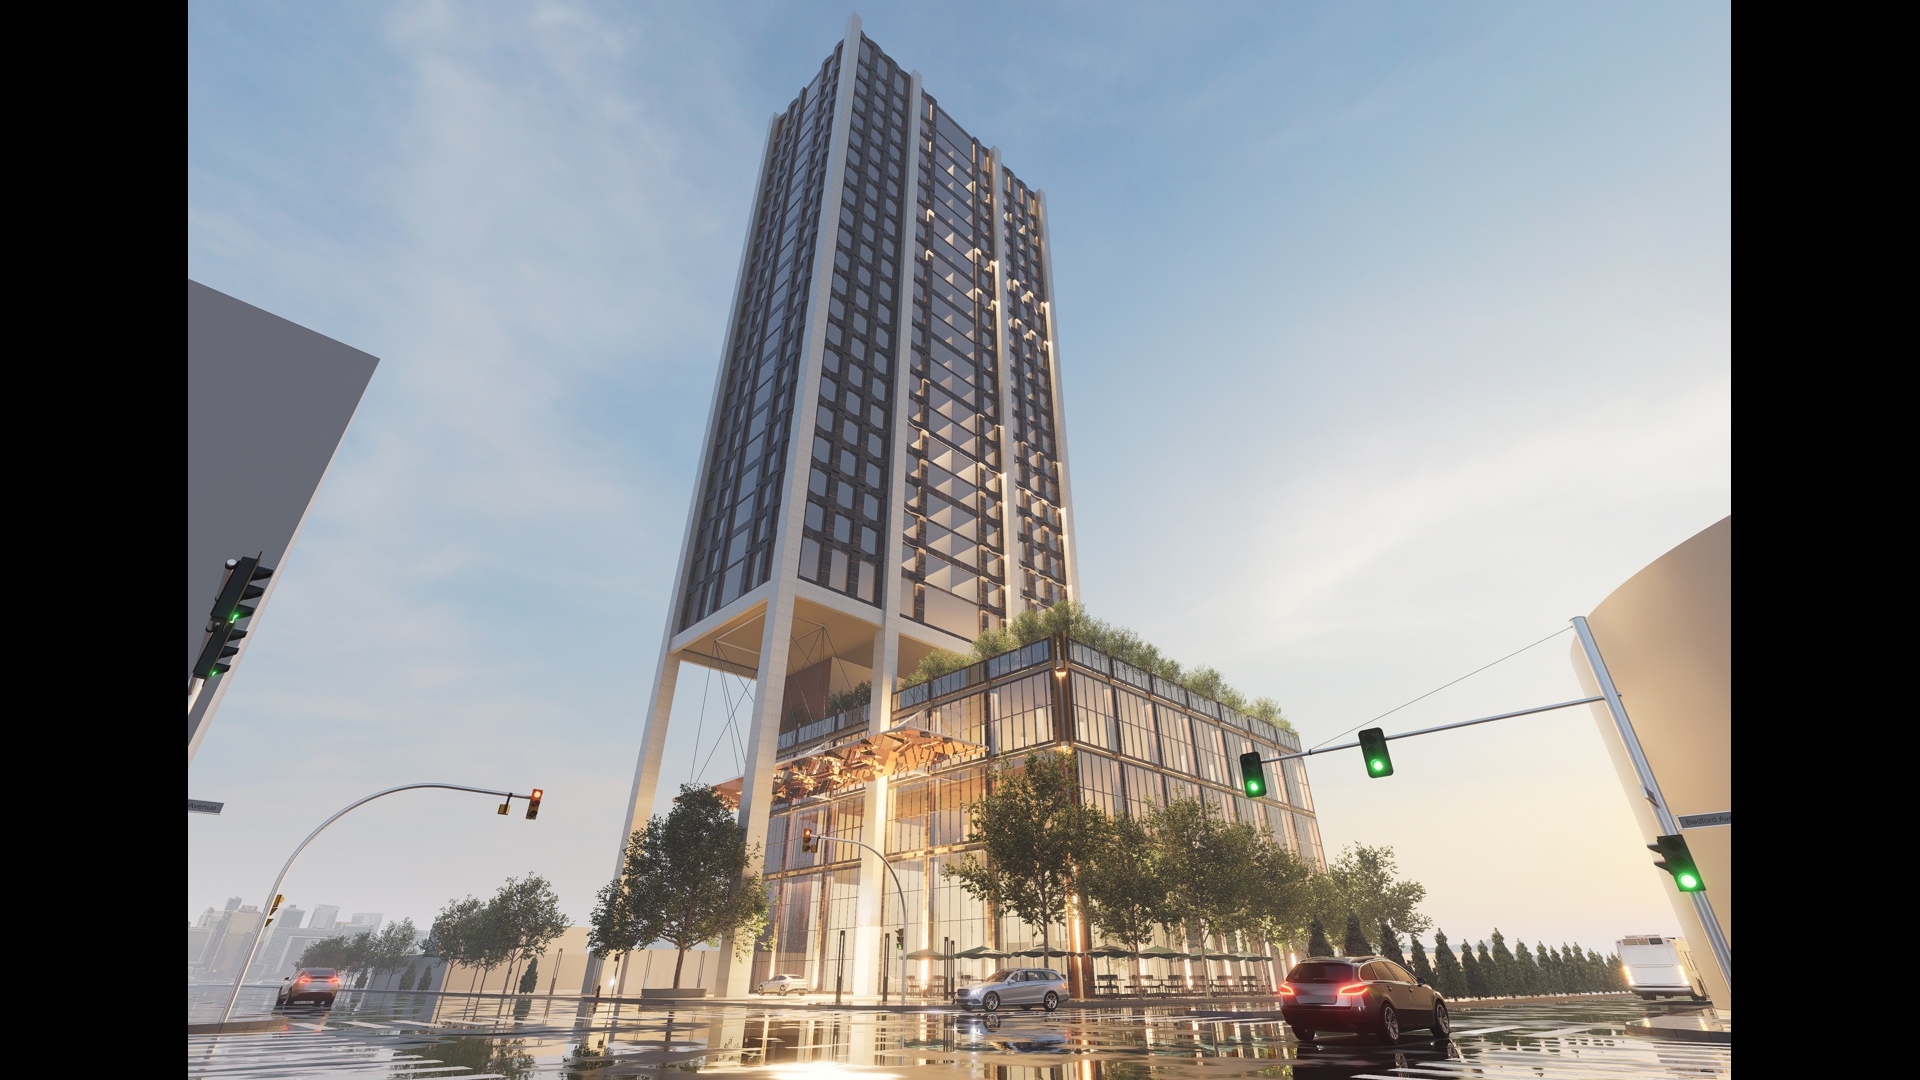 New York City-based real estate firm Zyyo confirmed plans to WHAS11 Tuesday for a $175 million, 27-story building in the heart of downtown Louisville.